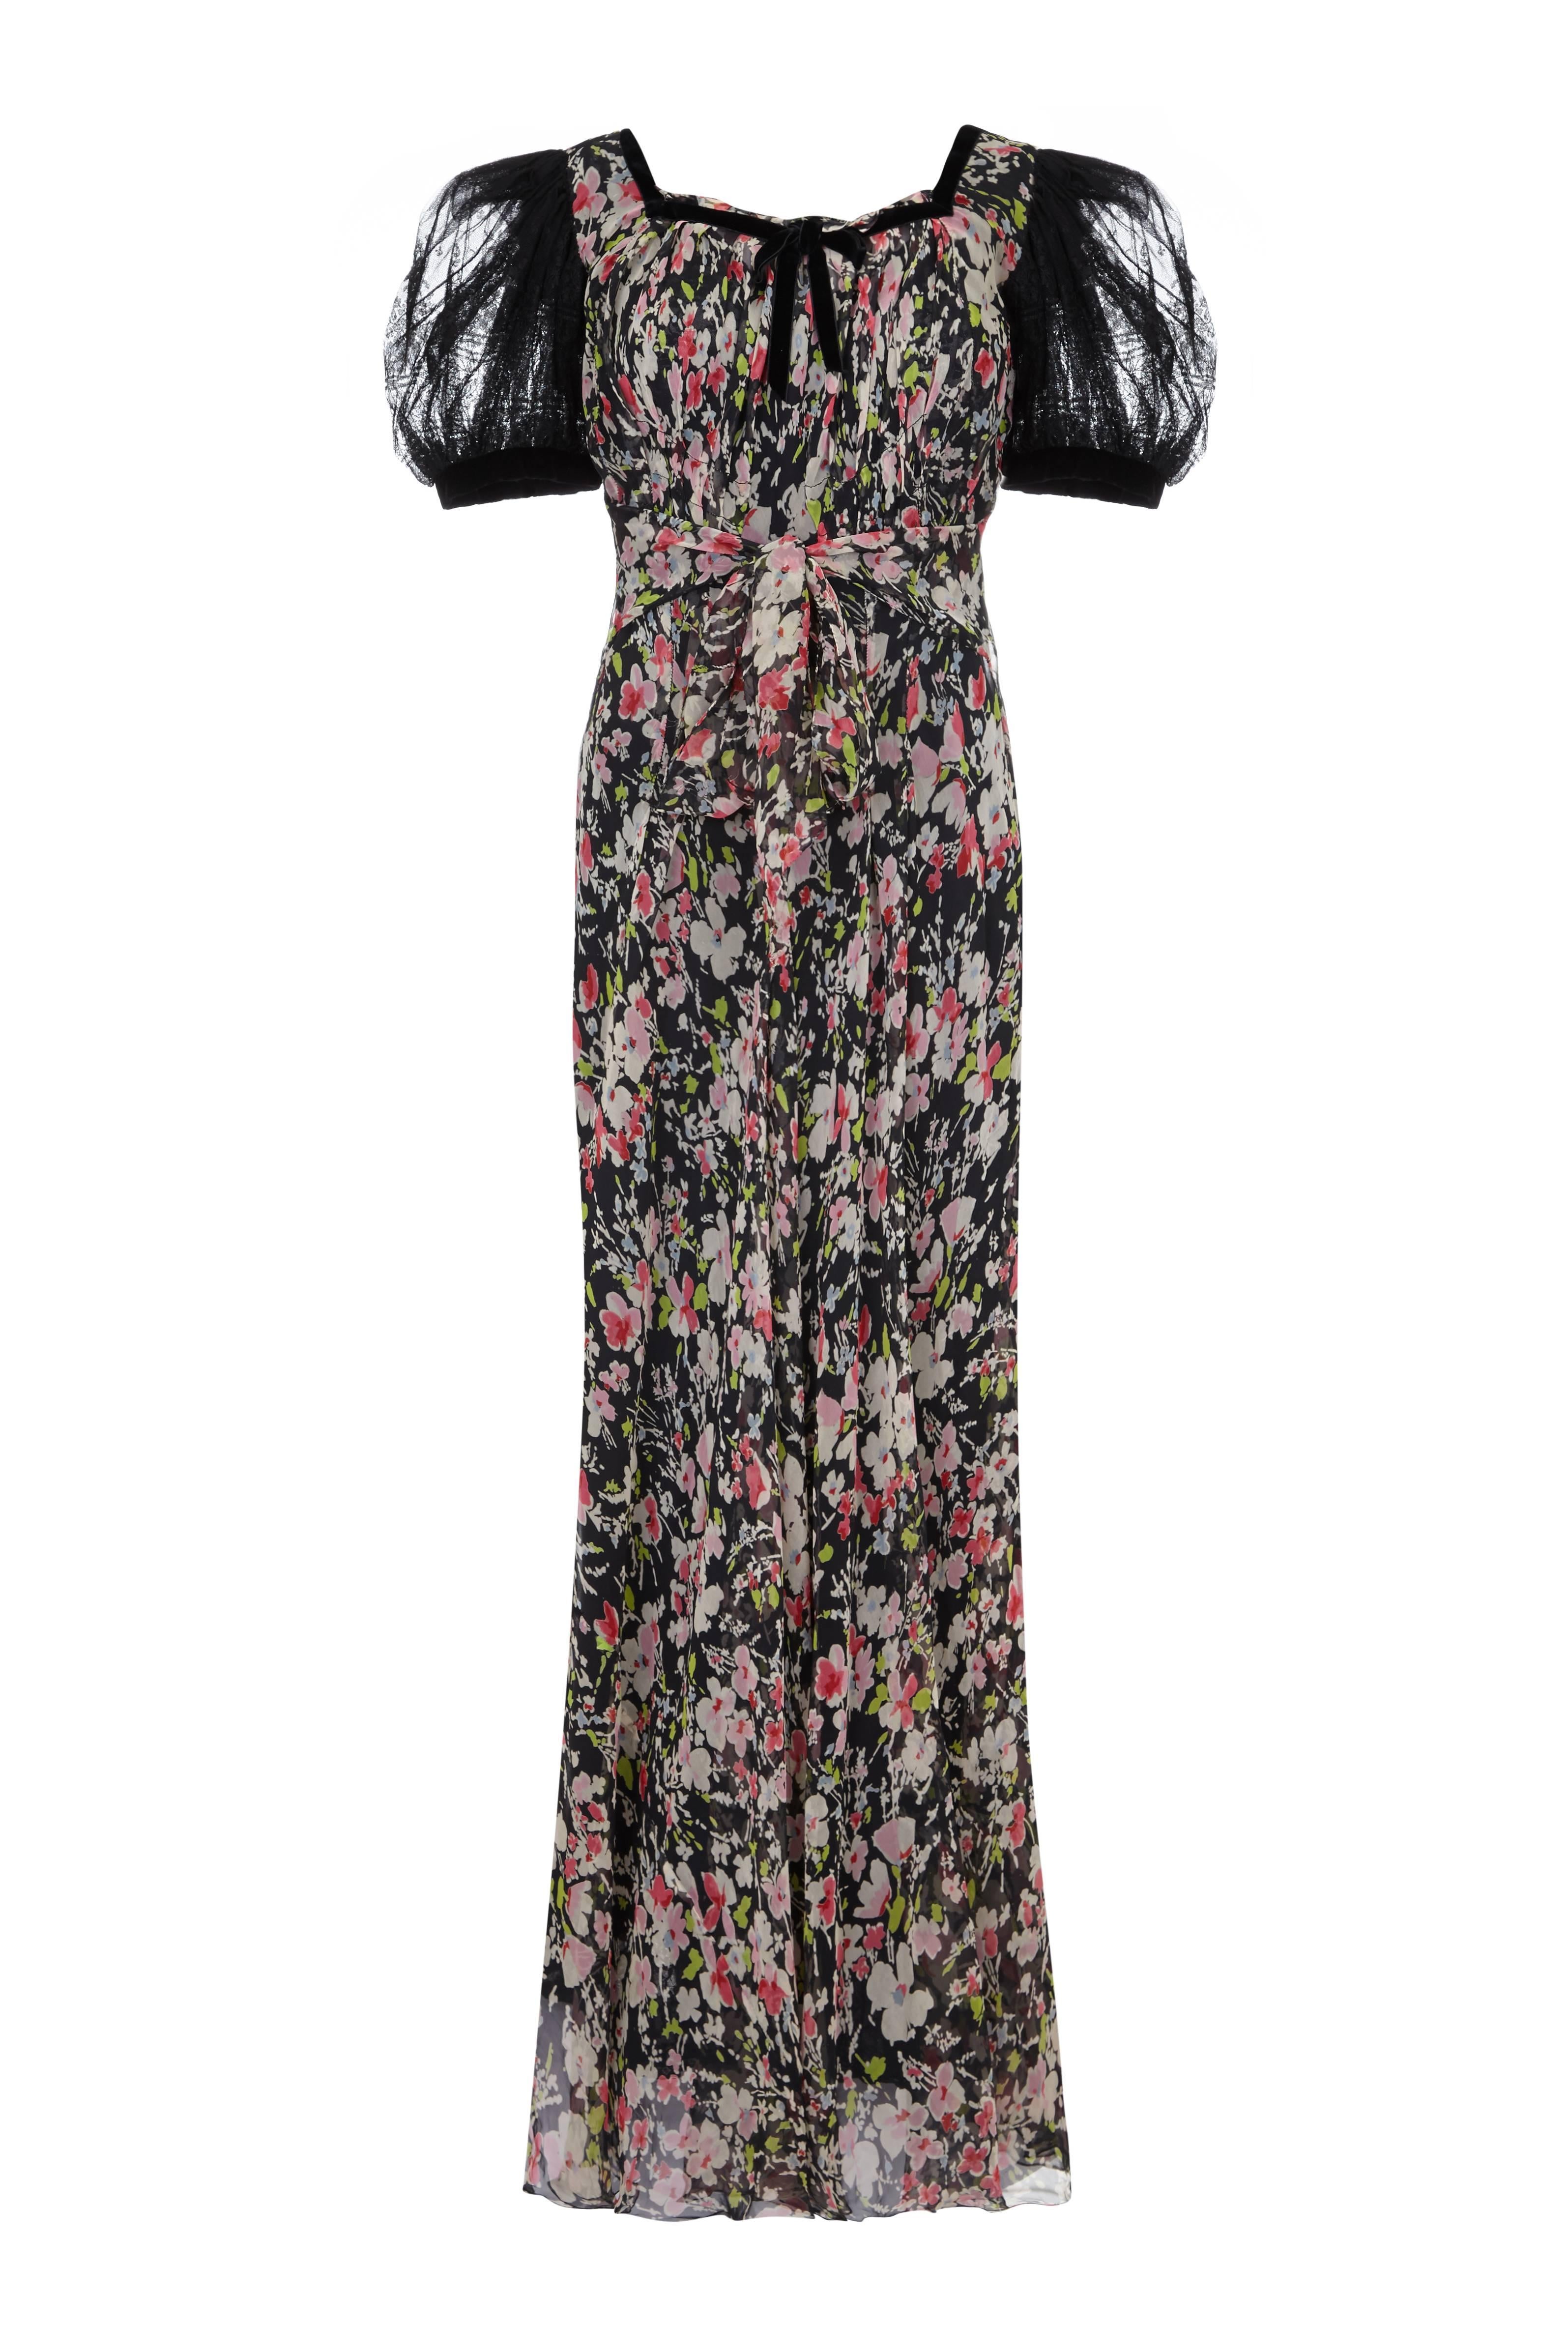 Beautiful vintage 1930s floral silk chiffon full-length dress with oversized black lace puff sleeves. This piece features black velvet trim and an attached waist tie belt.  Due to the sheer nature of the fabric the dress needs to be worn with a